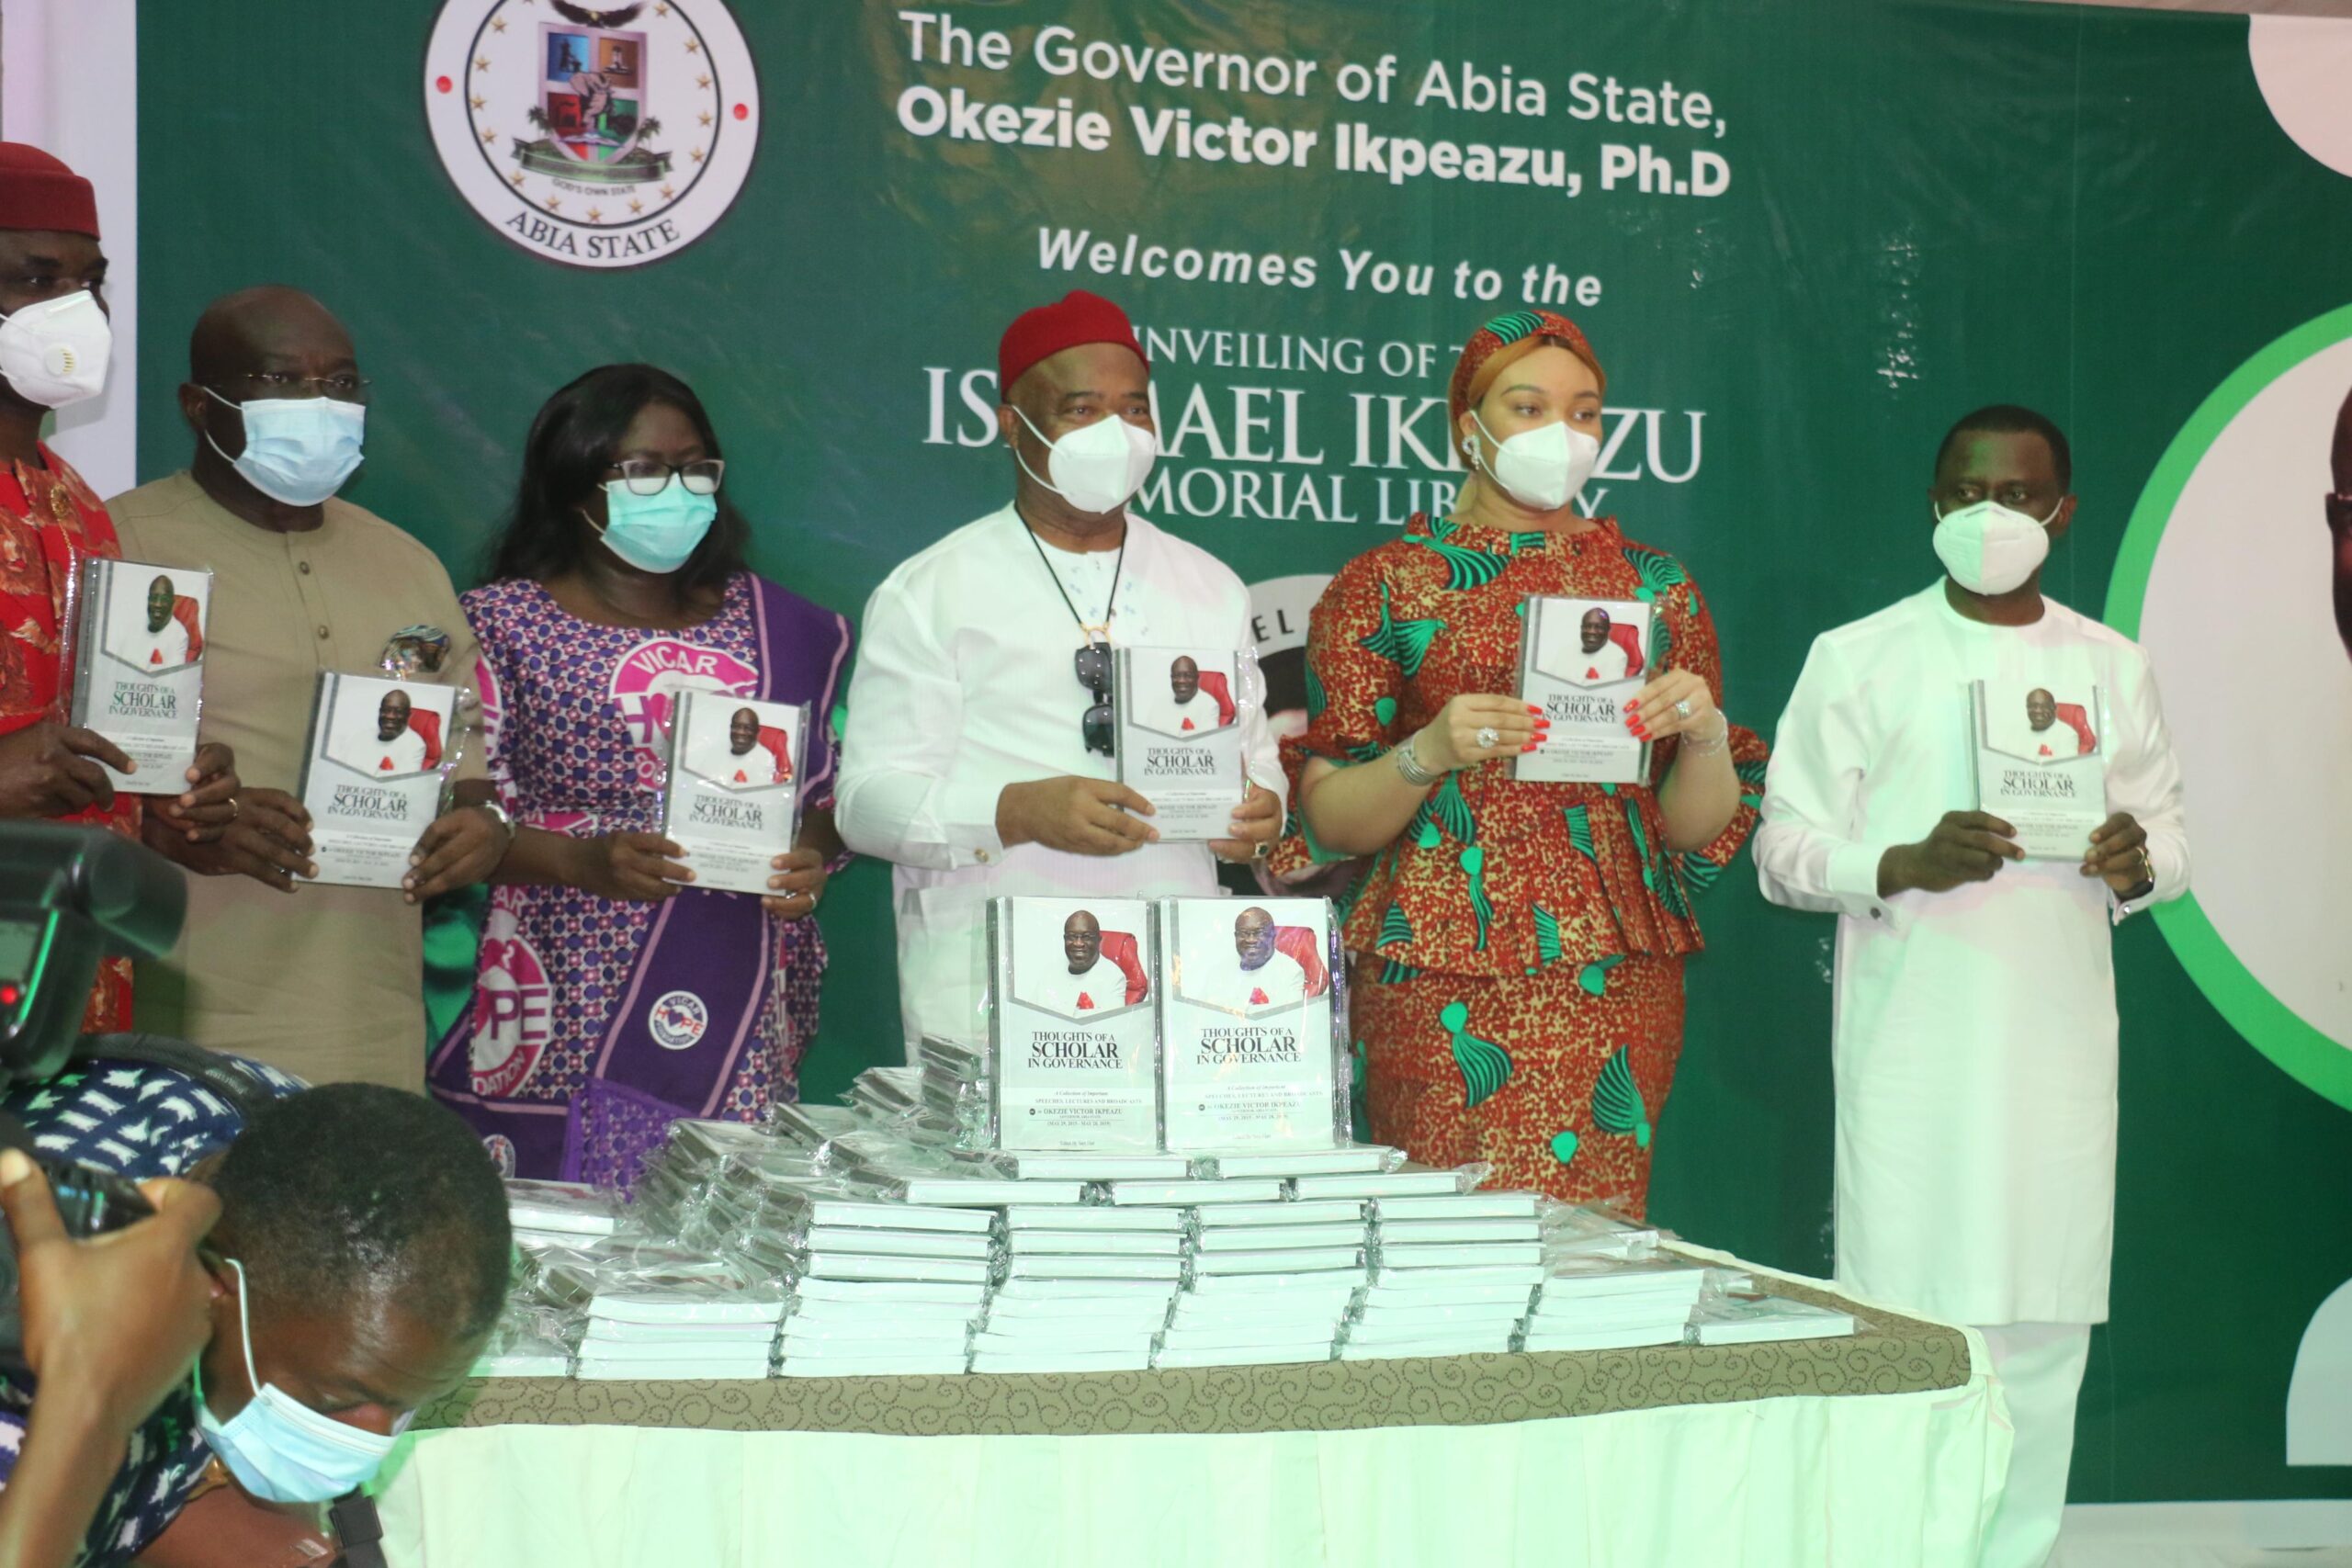 From R-L, Dr Uche Ogah, Minister for State Mine & Steel, Barr Mrs Chioma Uzodimma, Governor Hope Uzodimma, Dcns Nkechi Ikpeazu, Governor Okezie Ikpeazu and Dr Ude Oko Chukwu Deputy Governor of Abia State at the unveiling of the Ishmael Ikpeazu Memorial Library and book presentation in Abia State